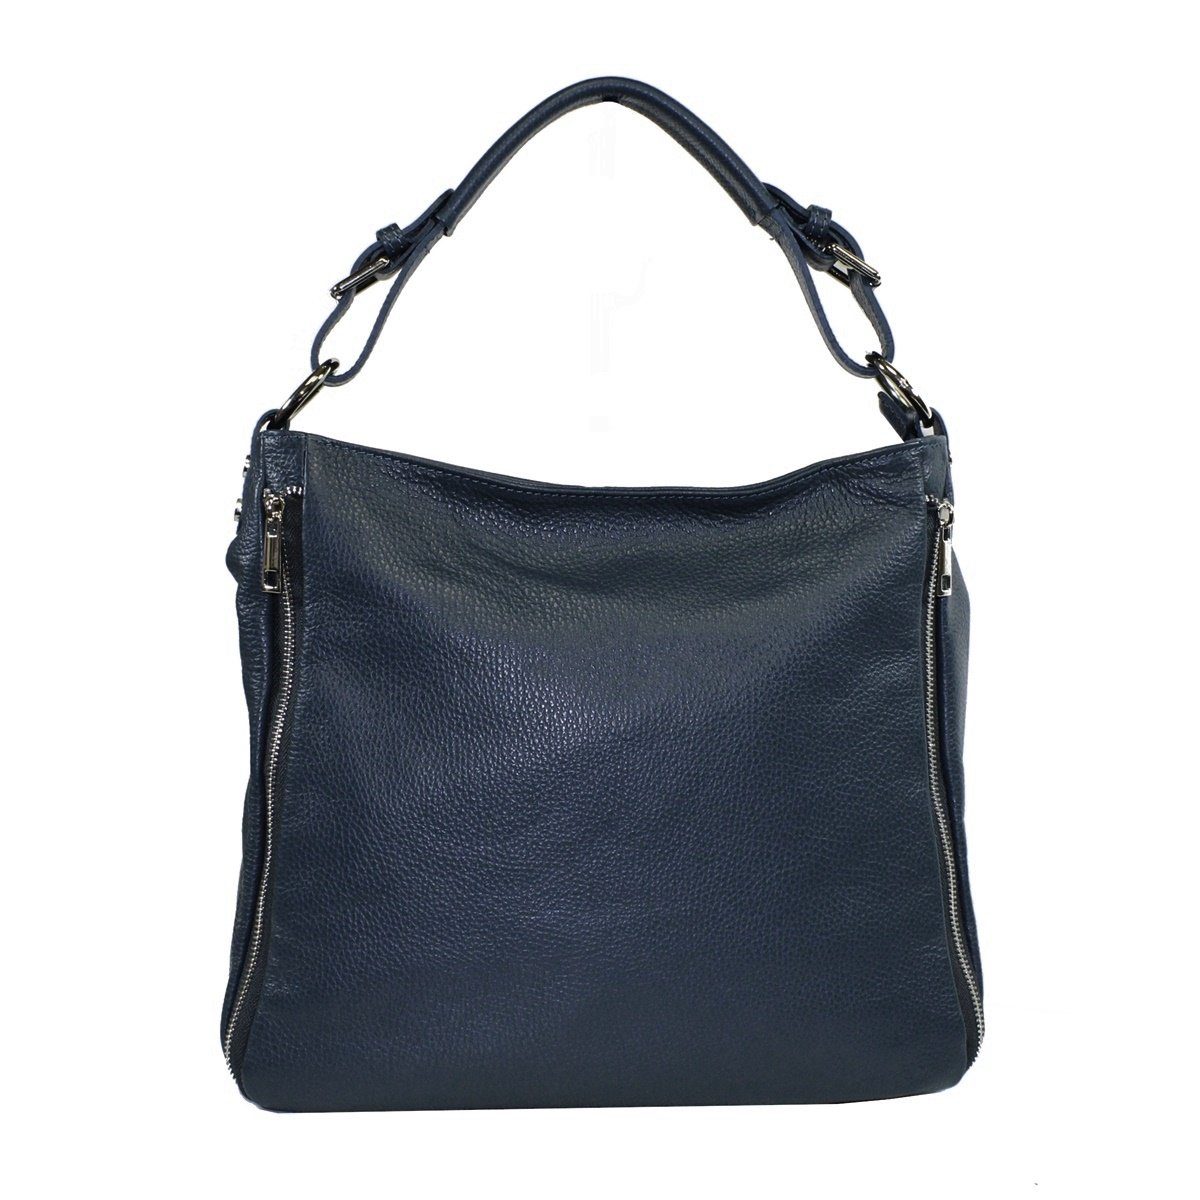 Made fs7142, fs-bags Italy Handtasche Navy in